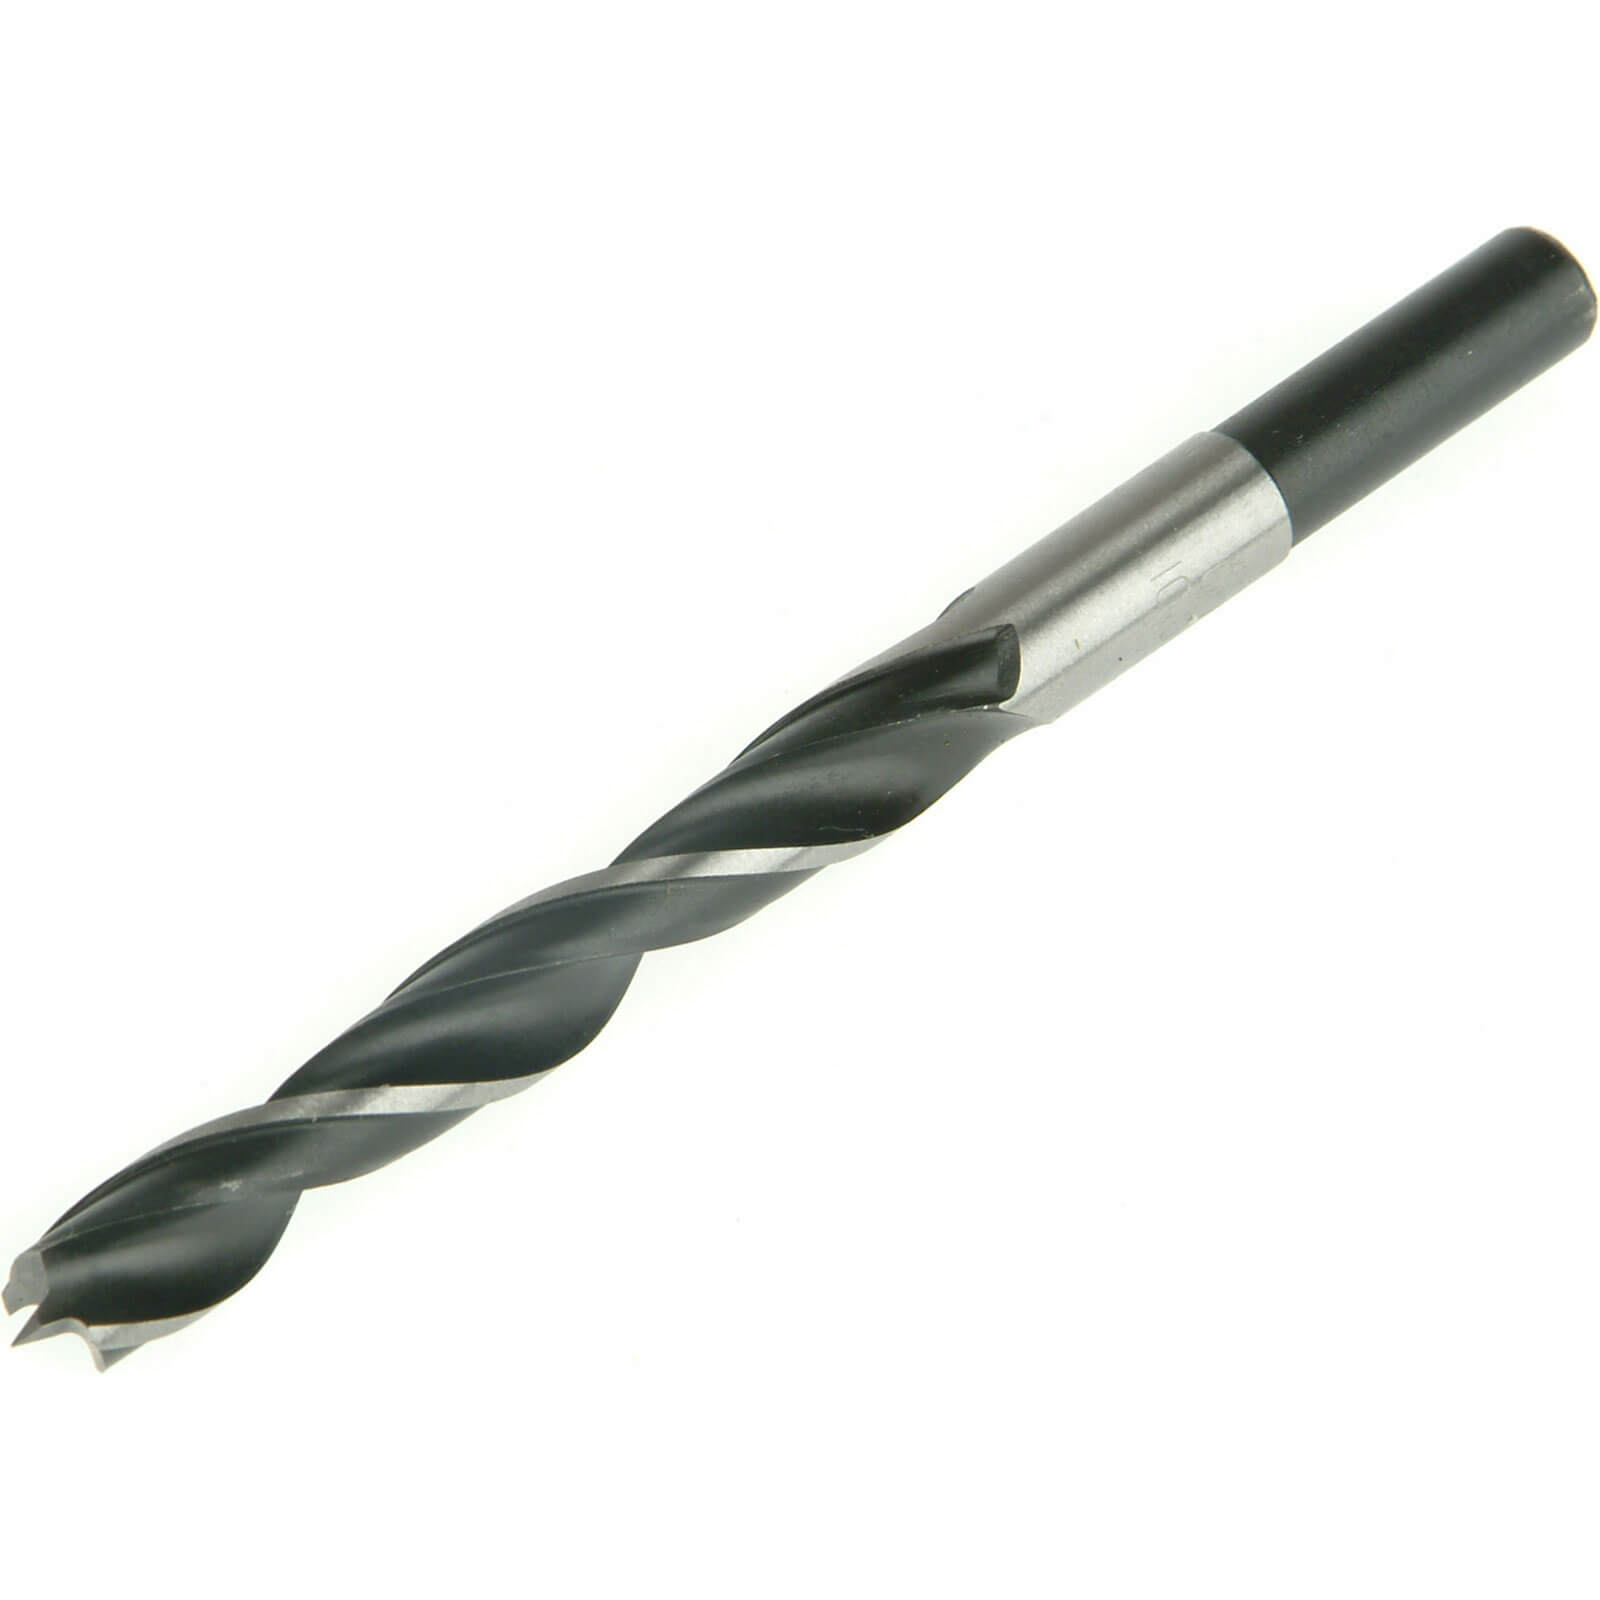 Photo of Faithfull Lip And Spur Wood Drill Bit 16mm